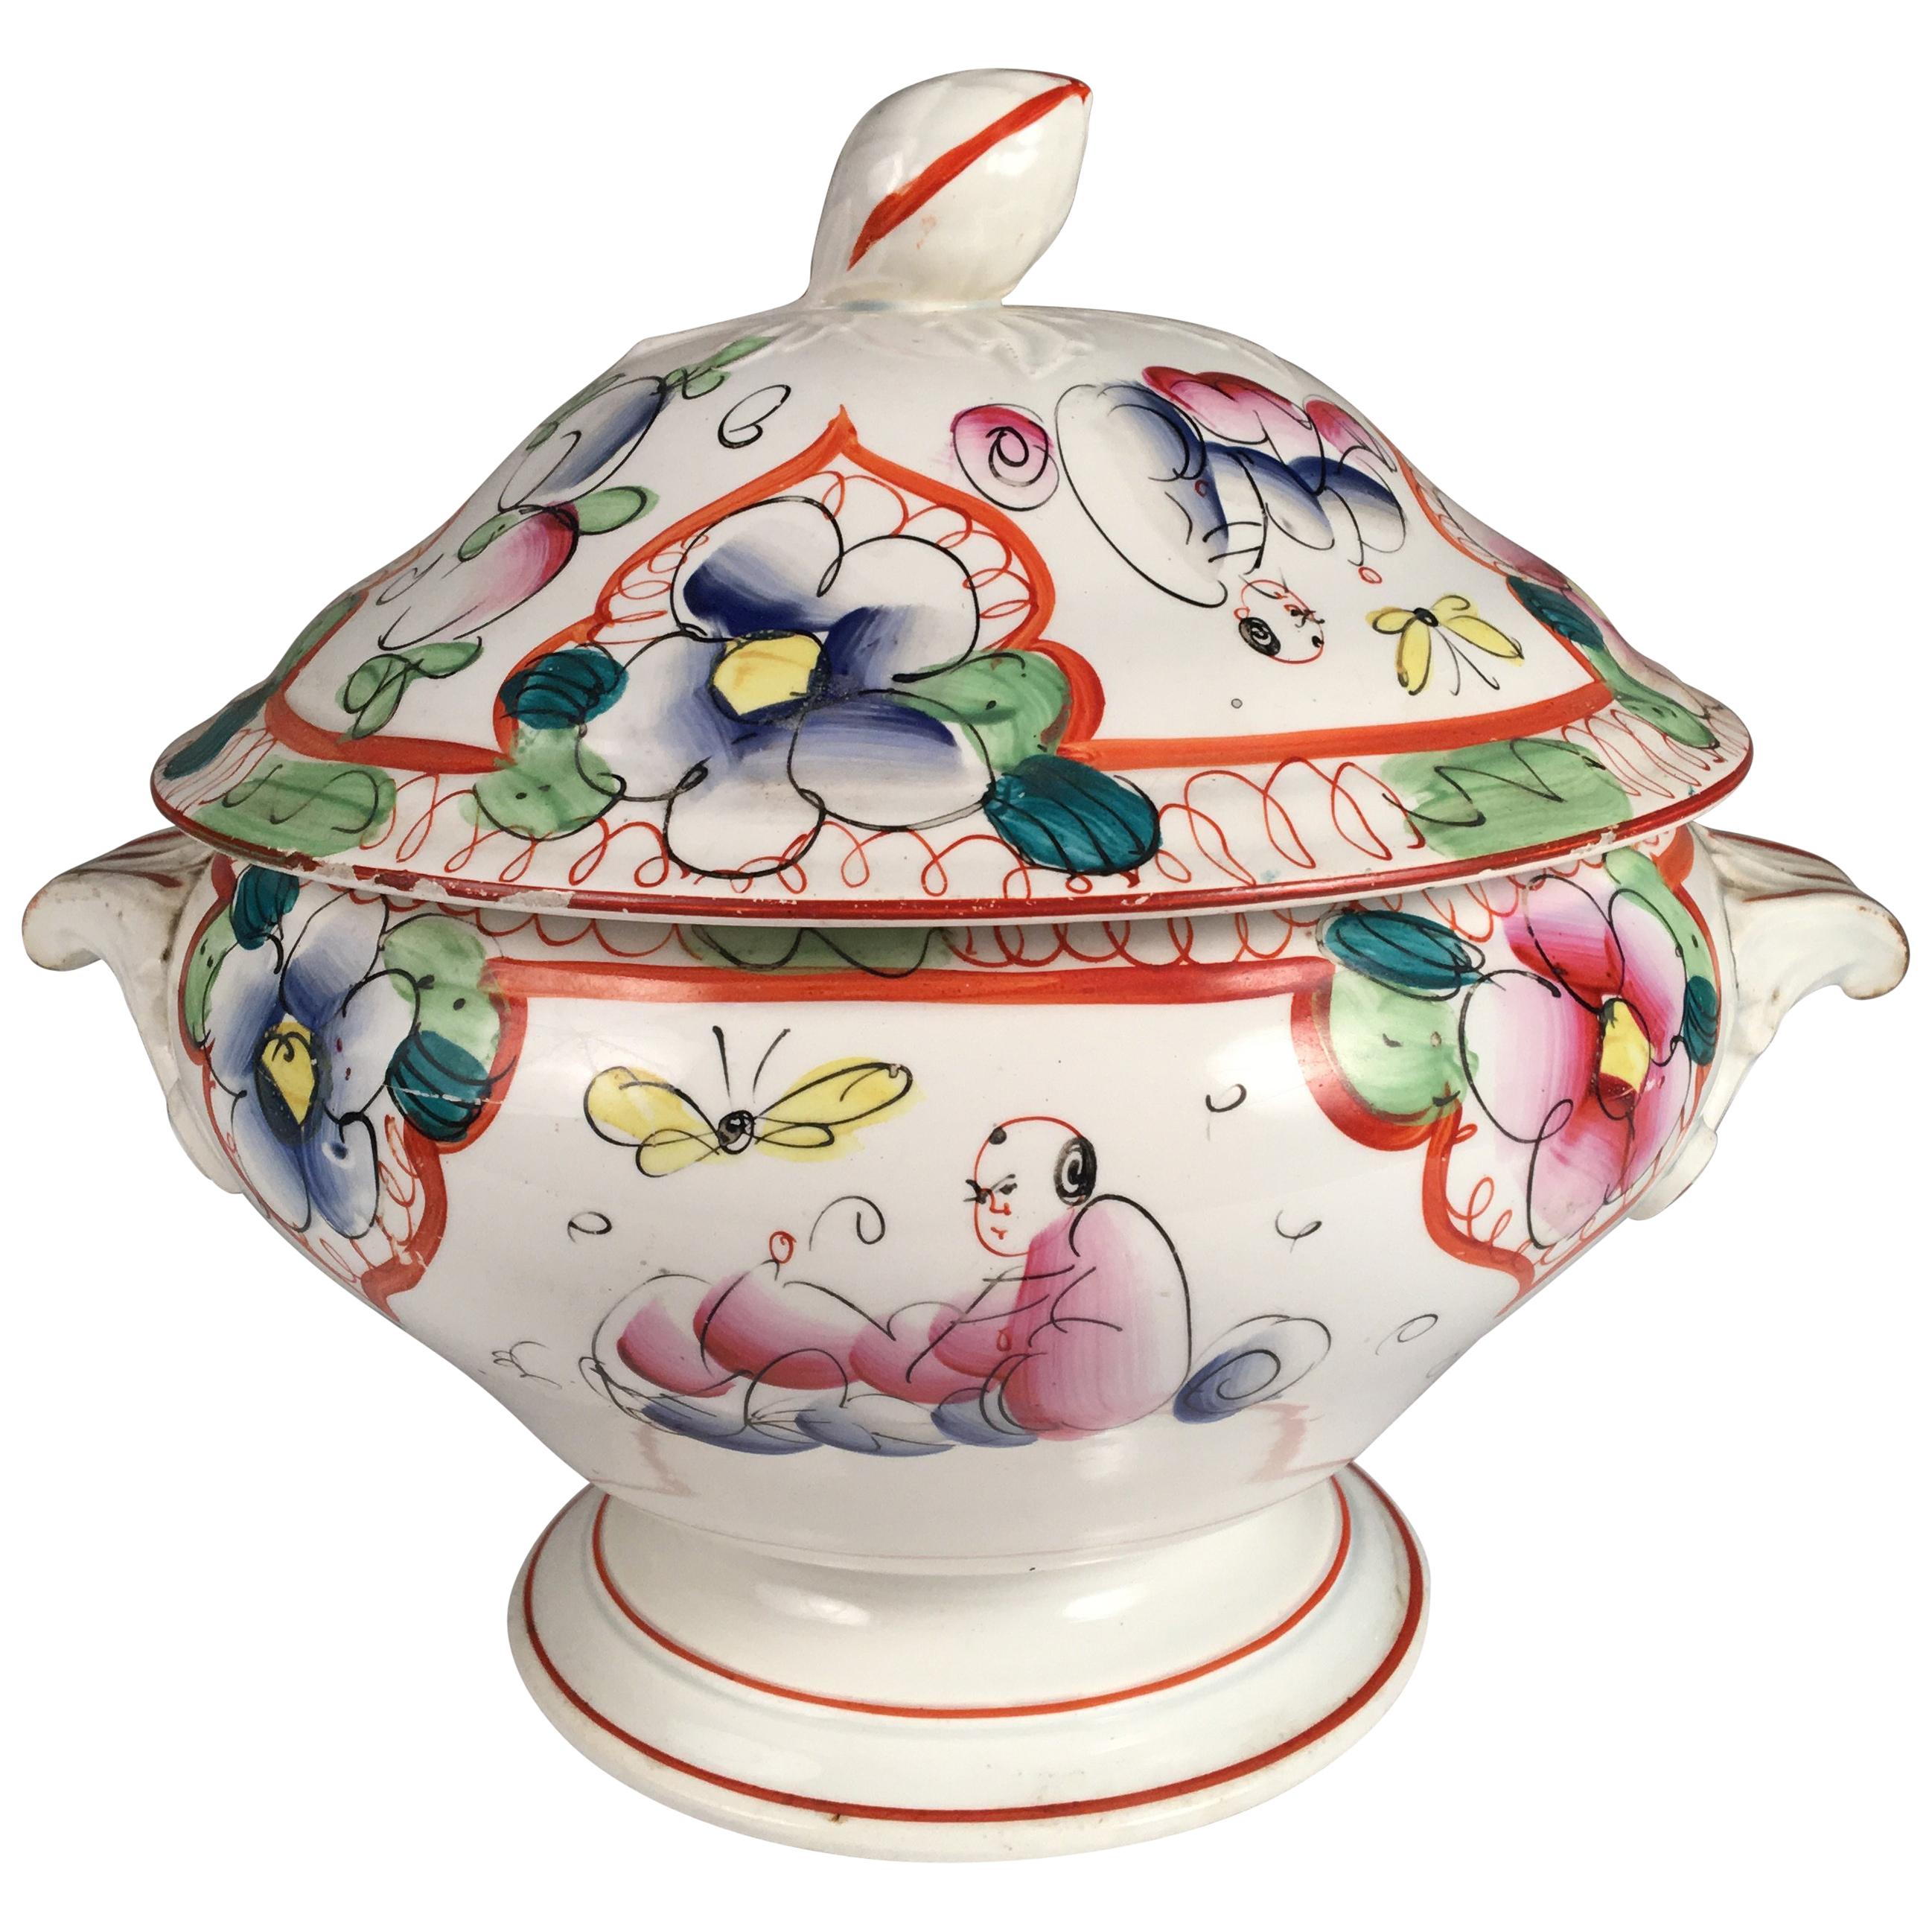 French Faience Soup Tureen, 19th Century